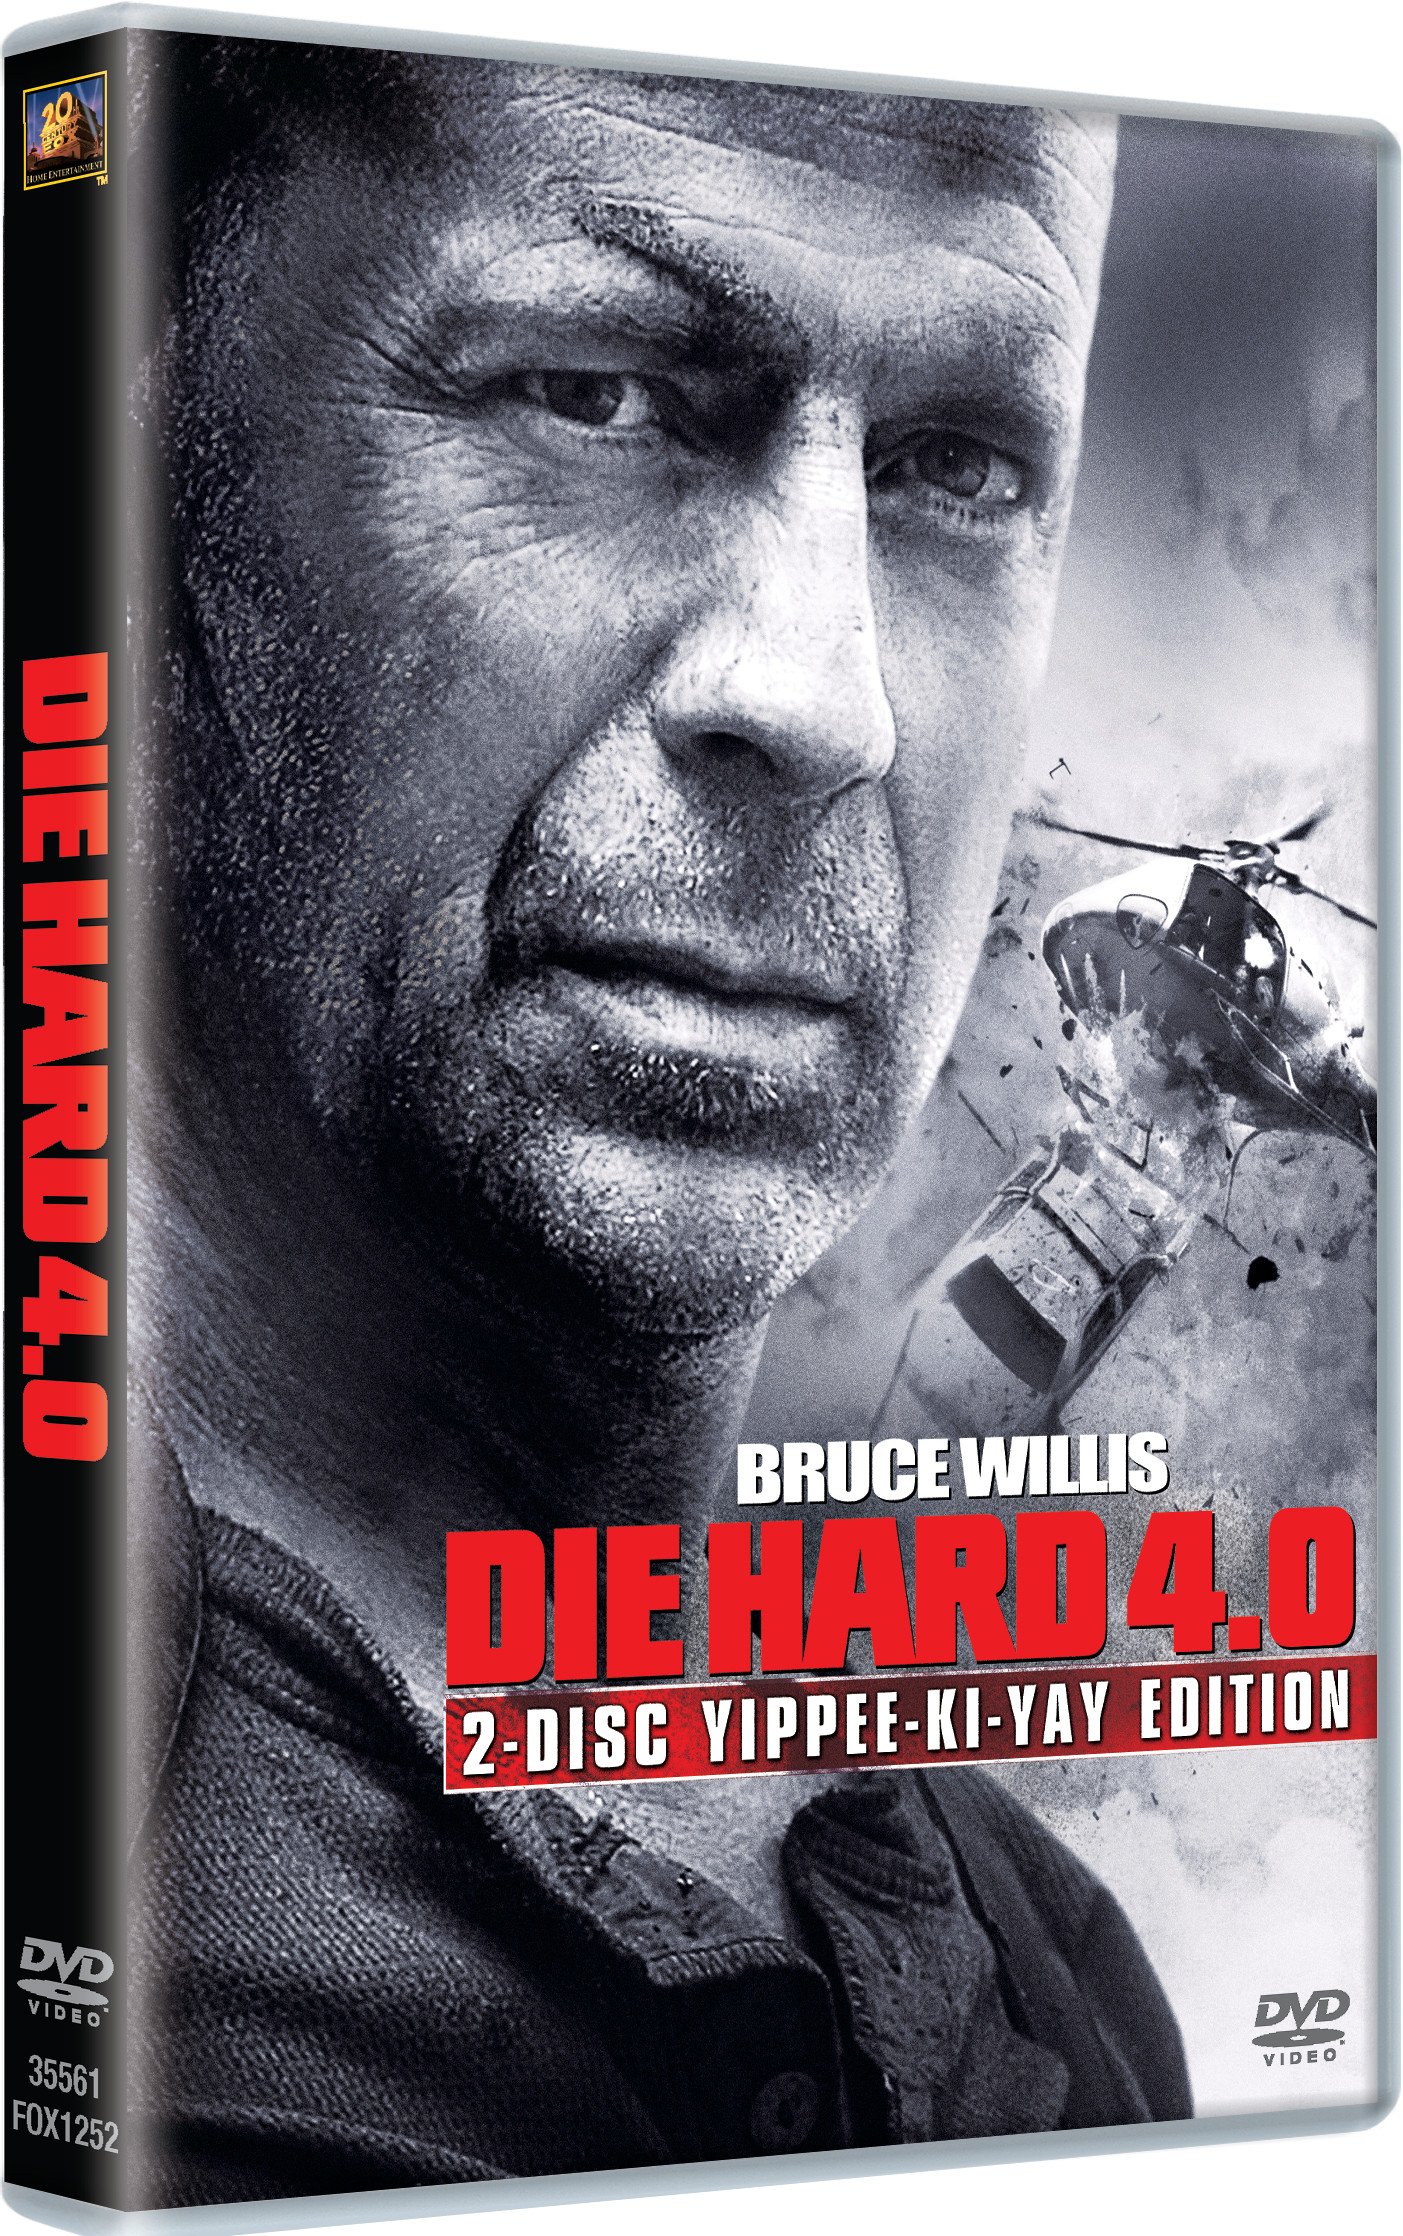 die-hard-4-0-yippee-ki-yay-edition-2-disc-movie-purchase-or-watch-online